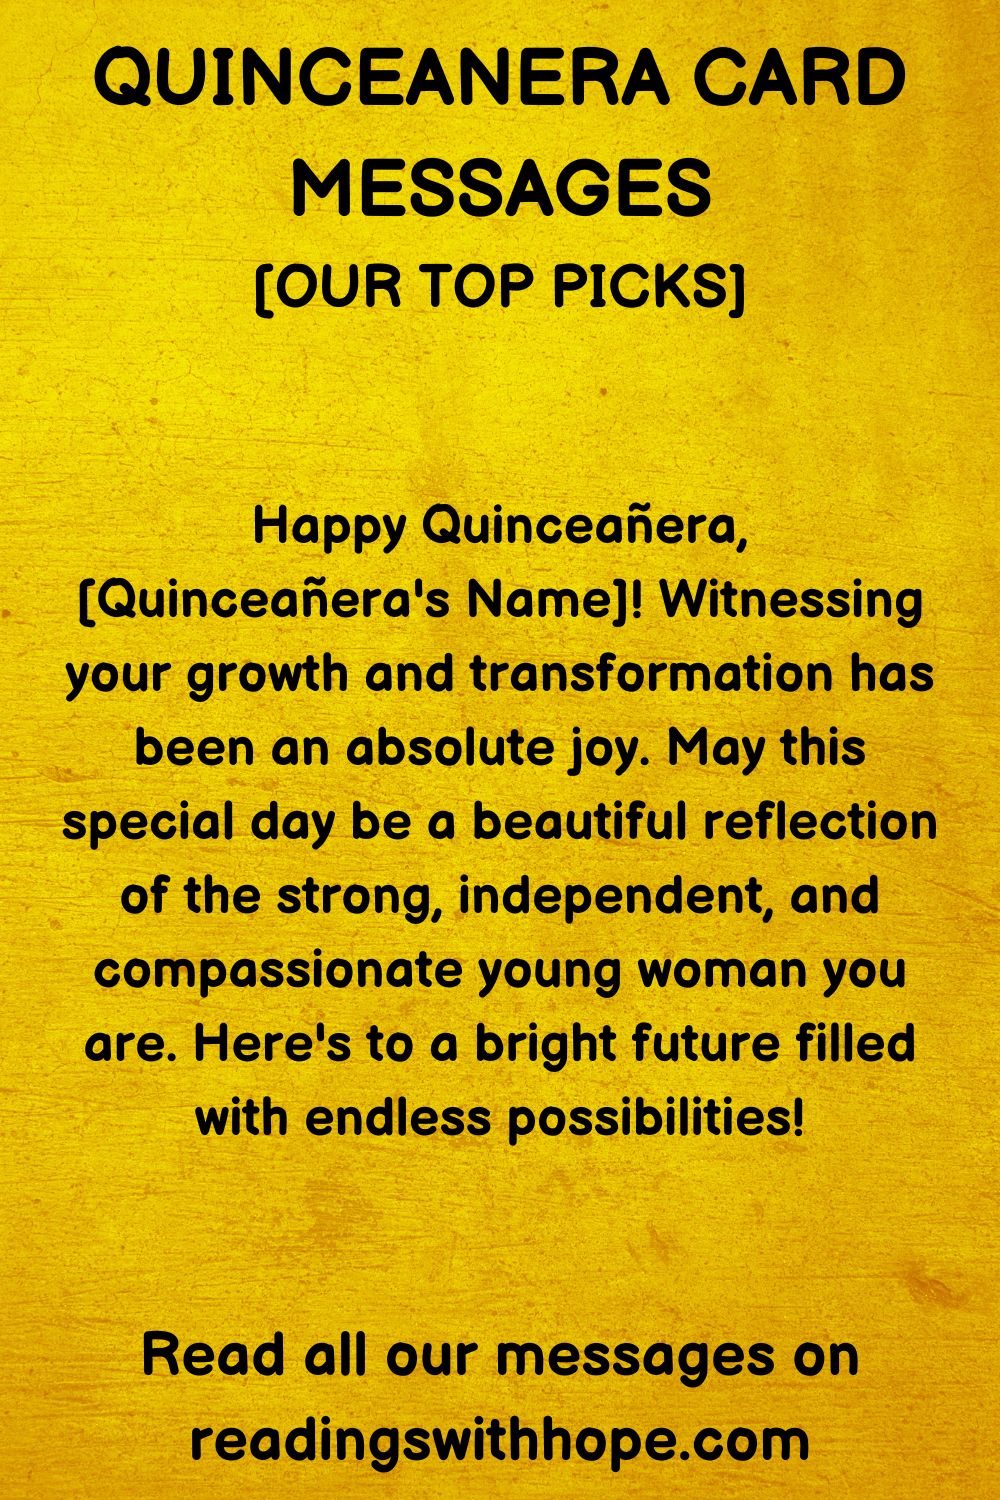 Quinceanera Card Message